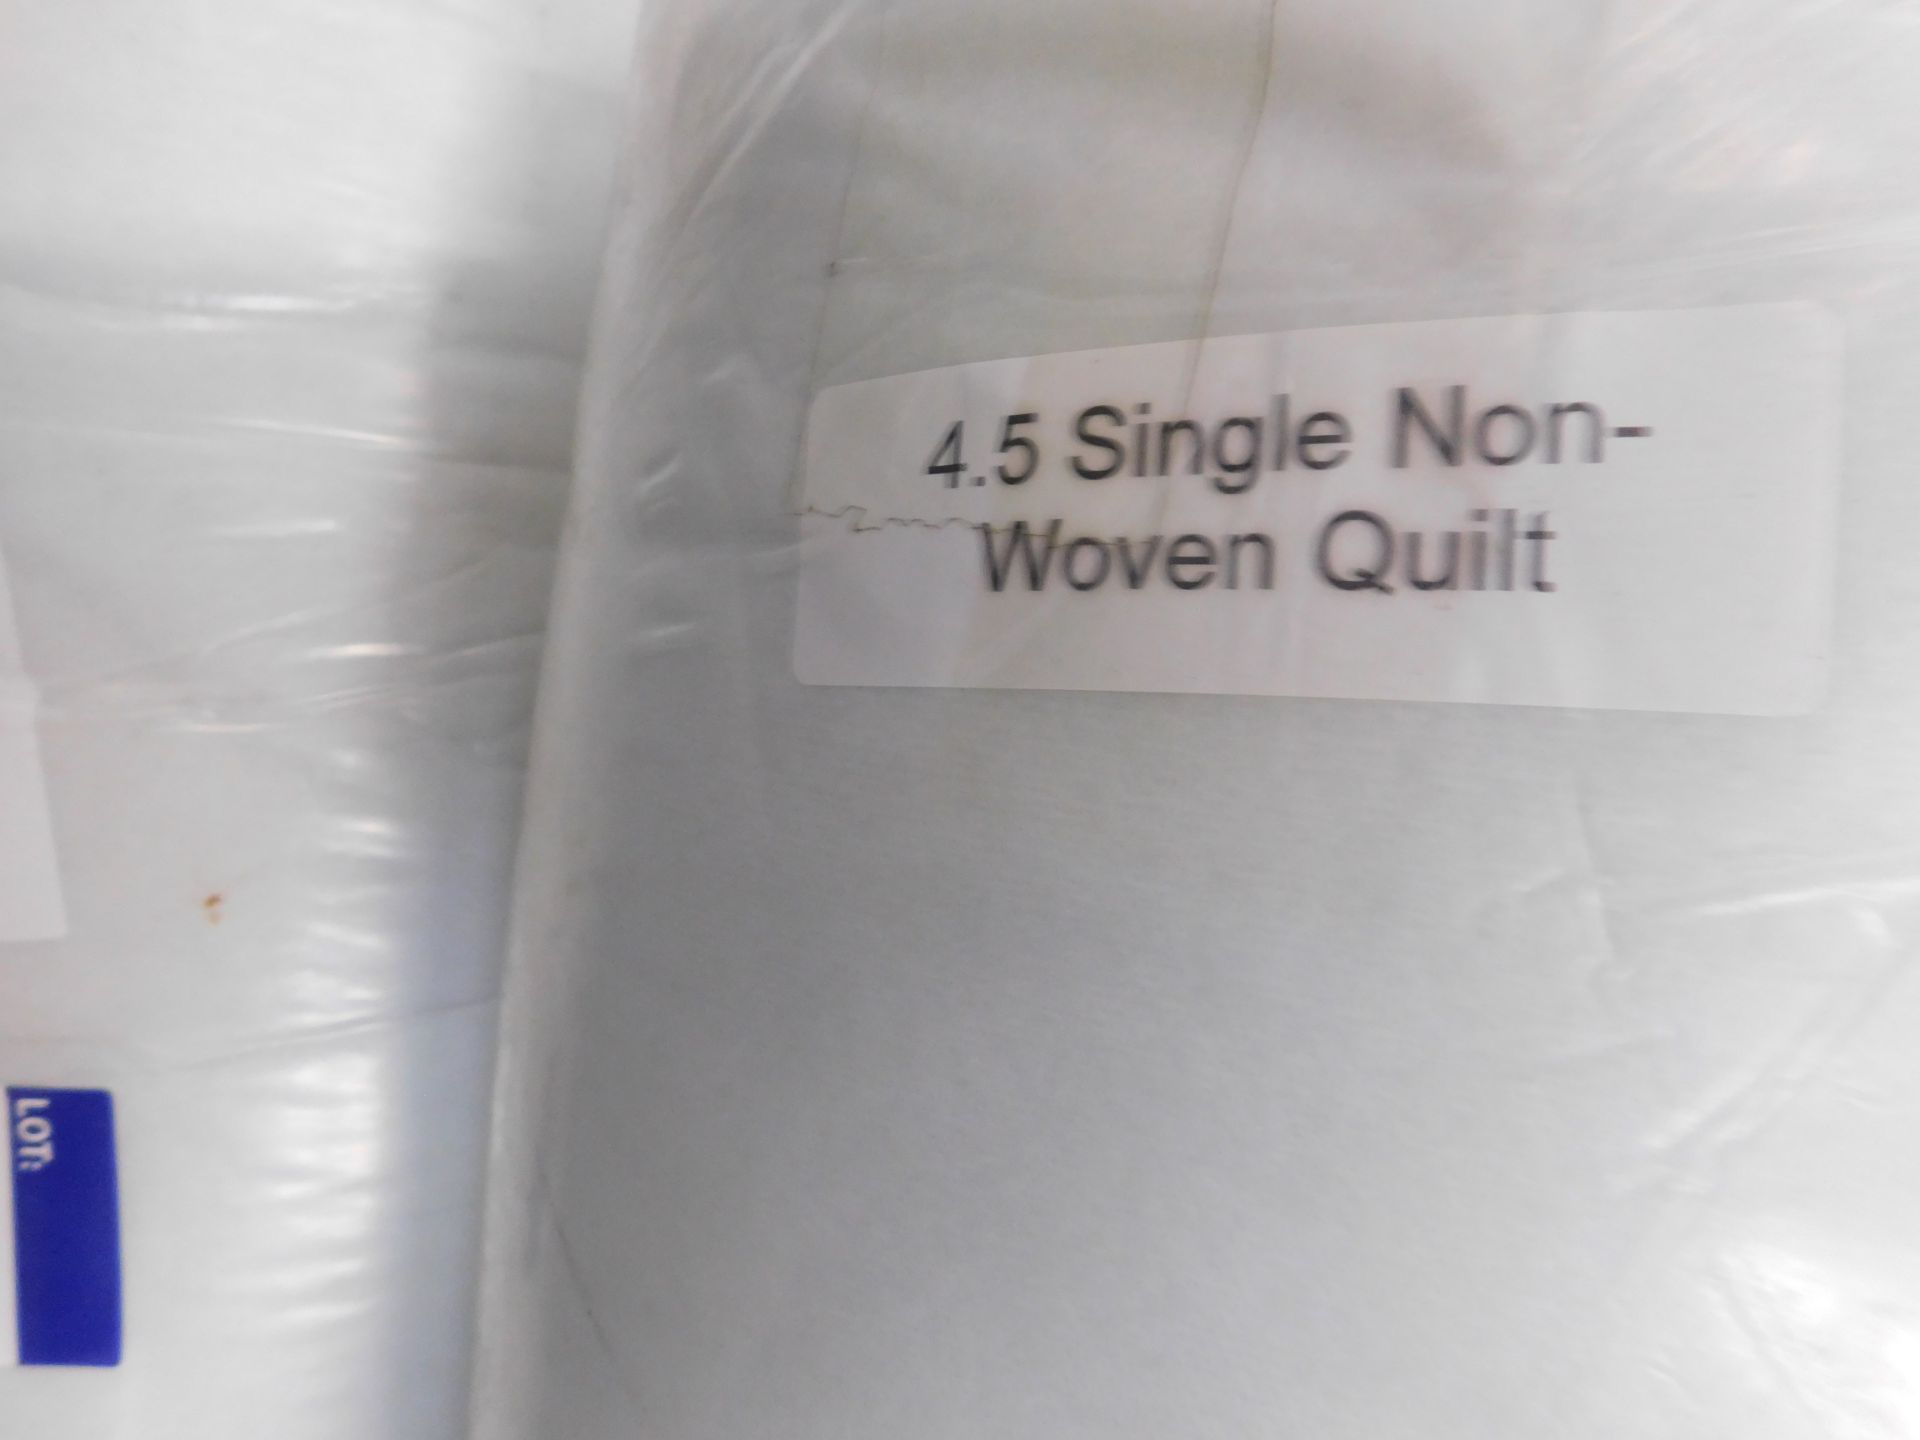 4.5 Superking Non Woven Quilt (x18) 4.5 King (x24) - Image 4 of 4